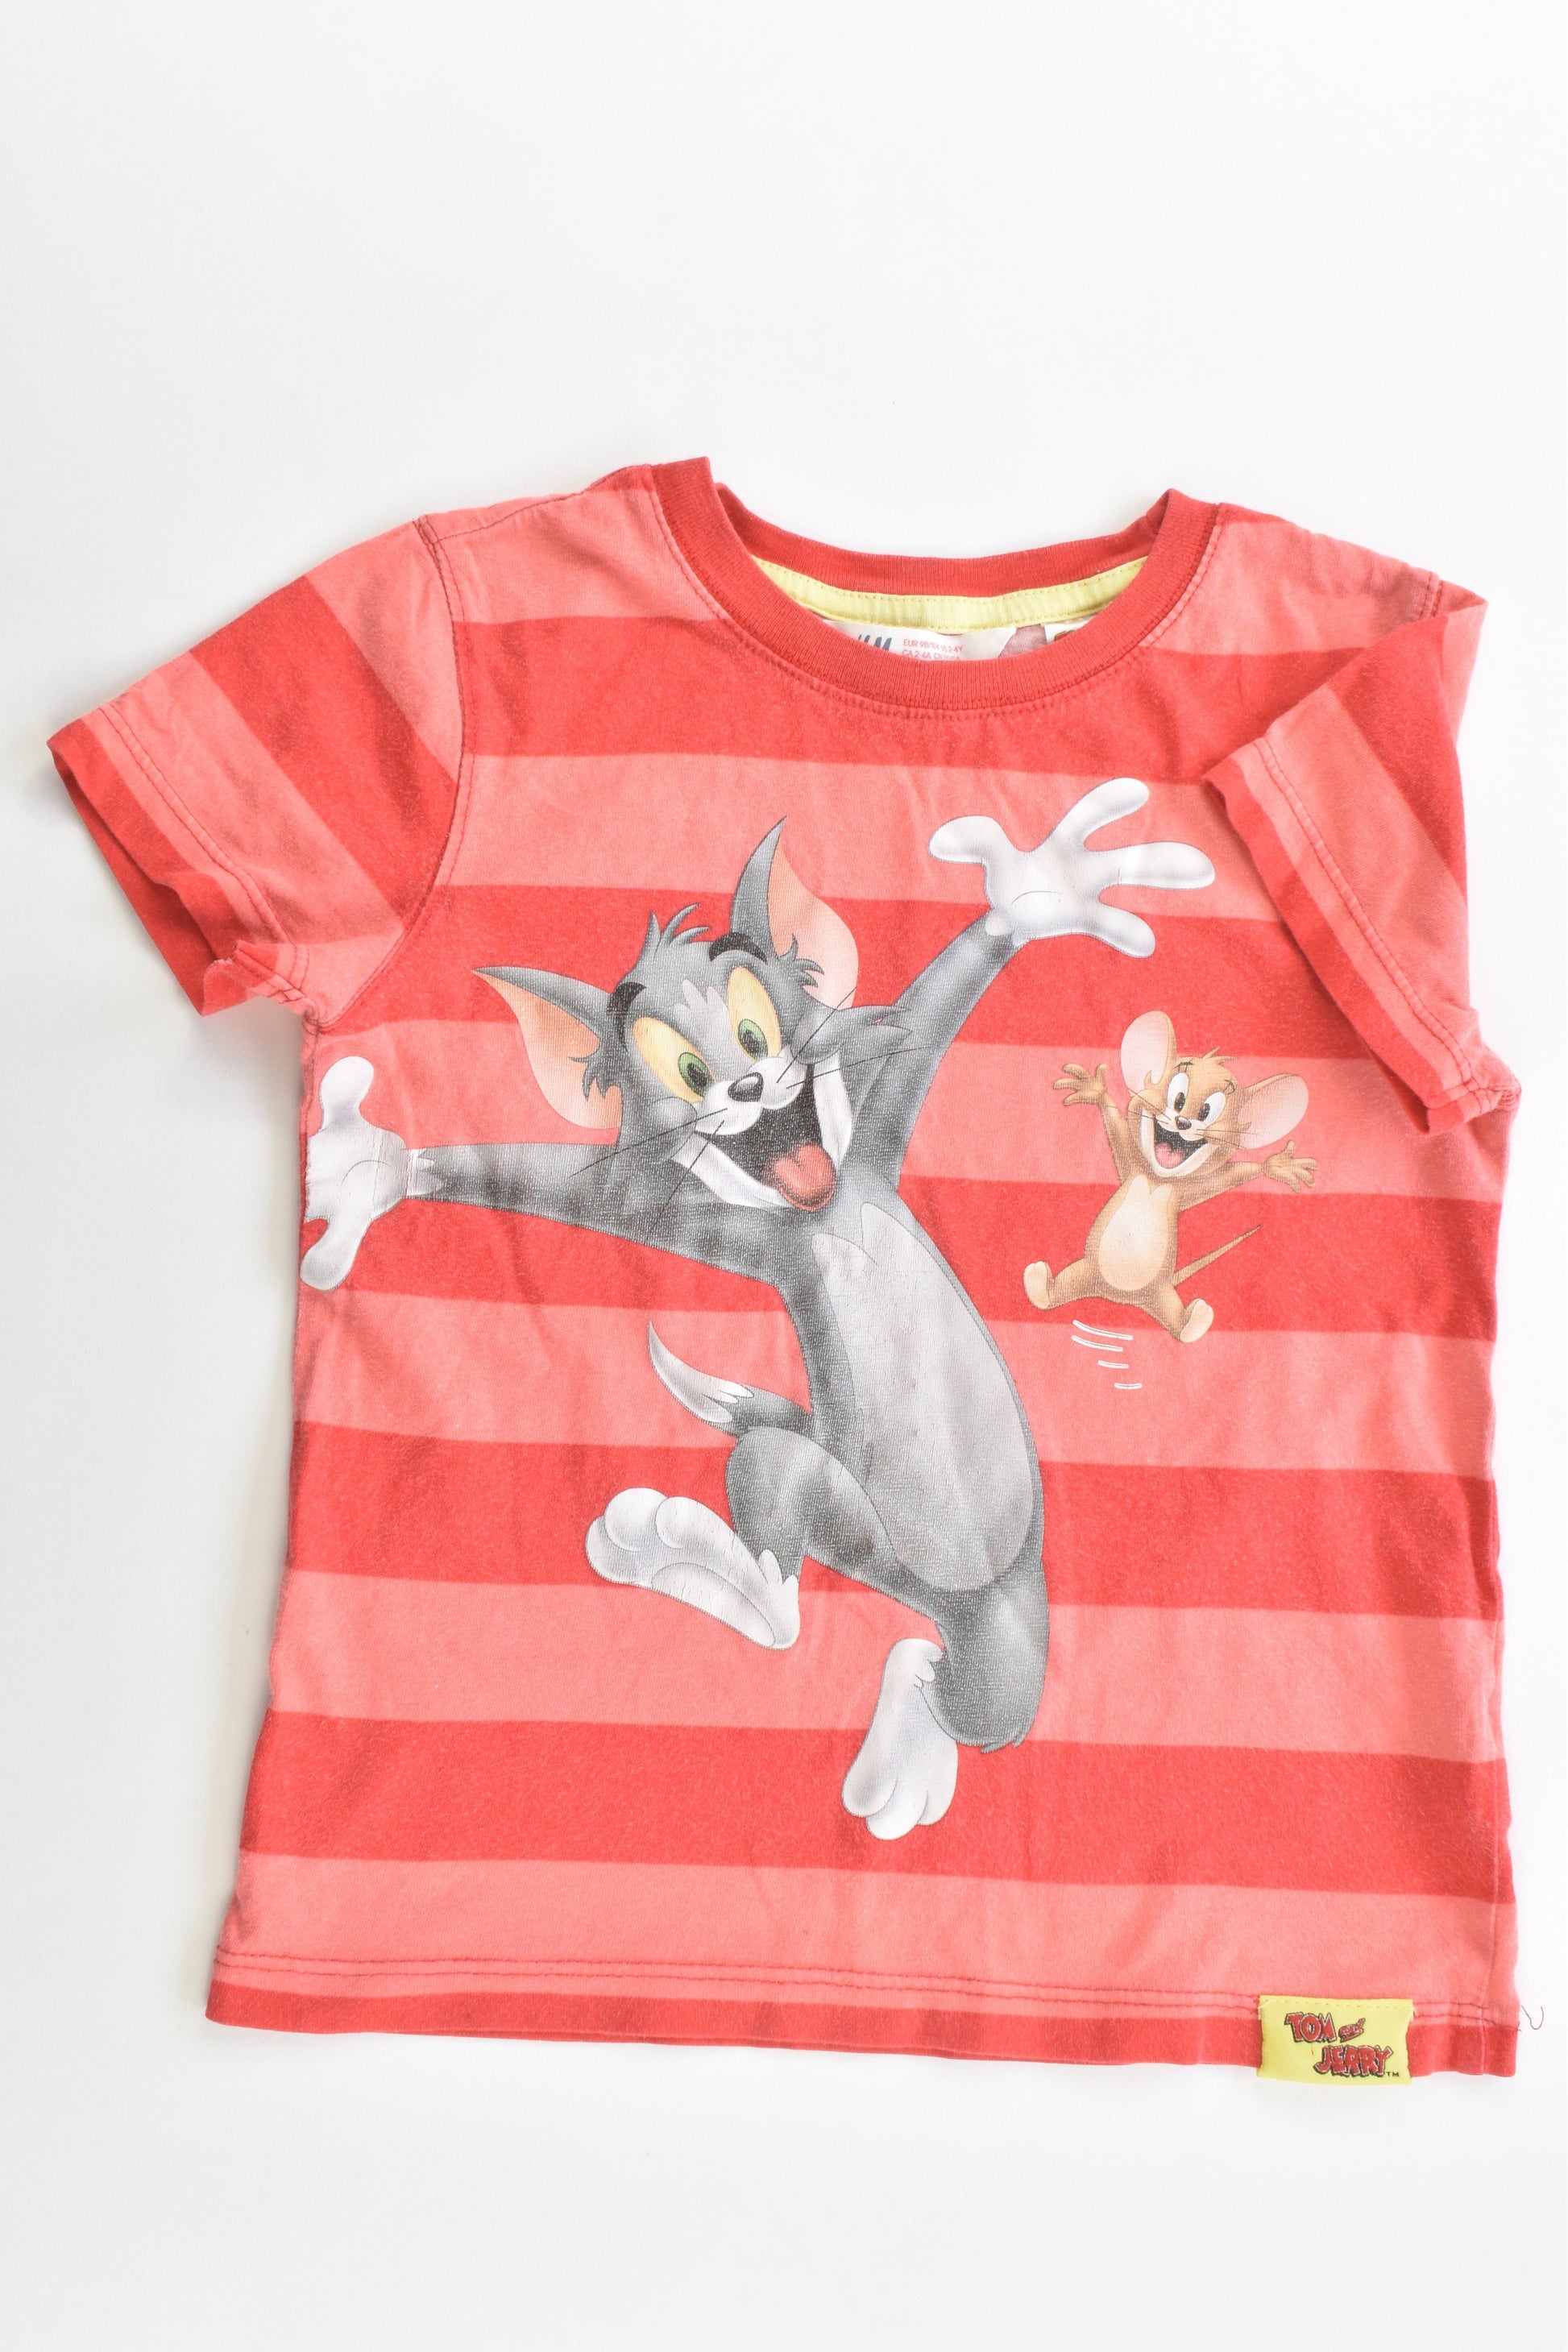 H&M Size 3-4 (98/104 cm) Tom and Jerry T-shirt